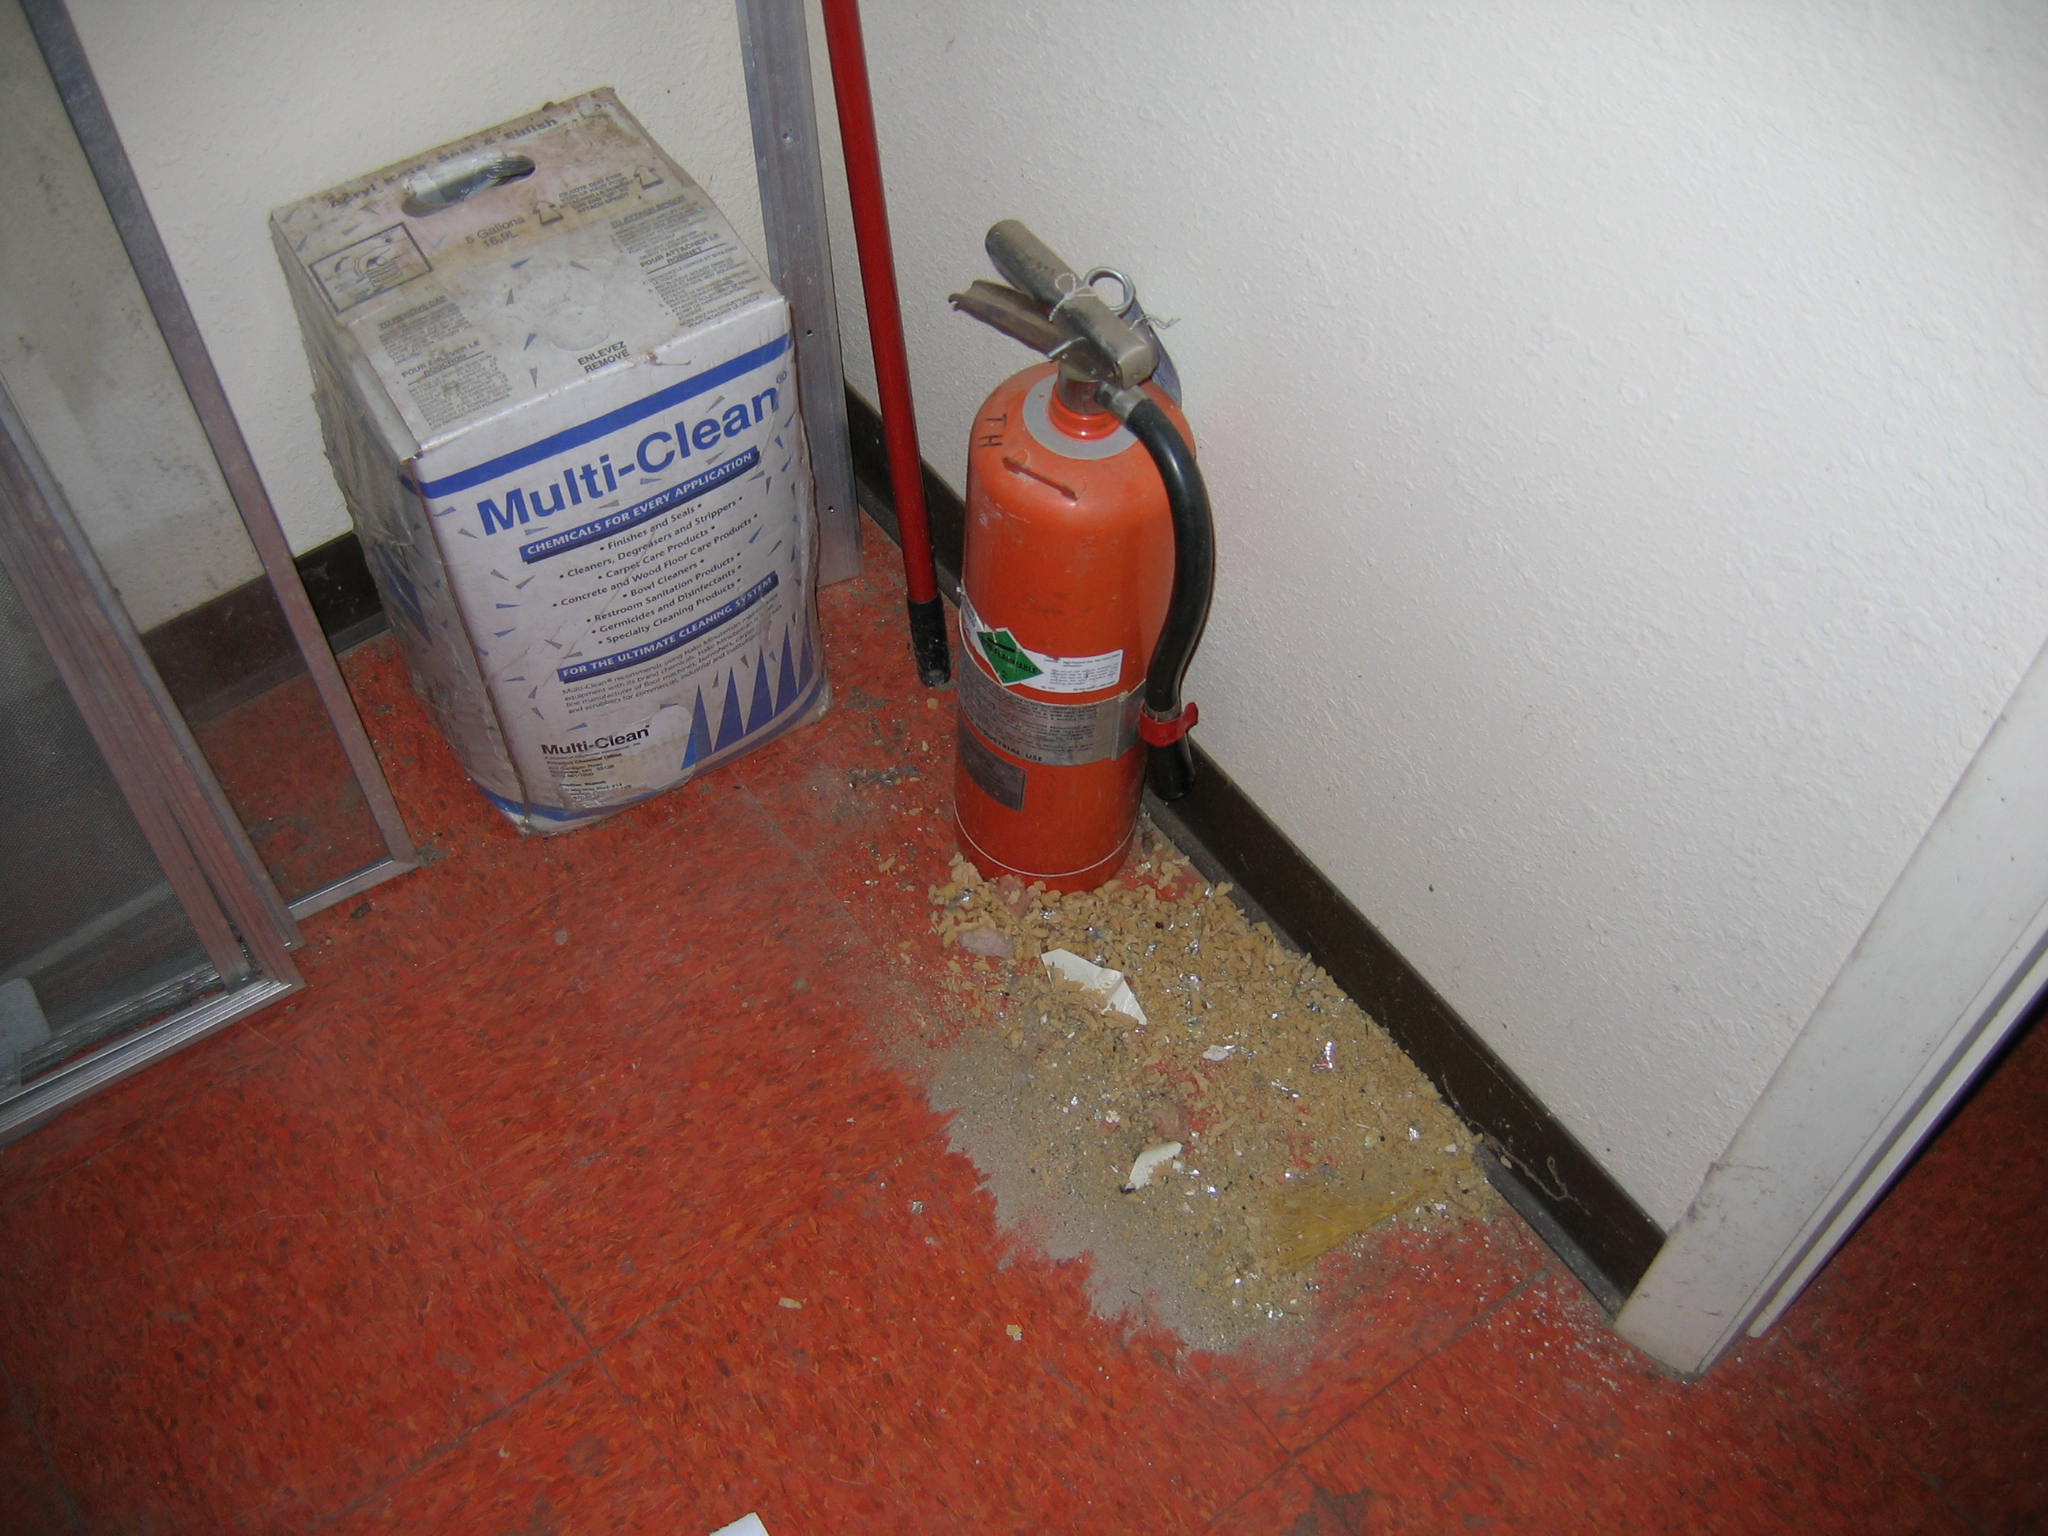 Poor housekepping with debris on floor anf fire extinguisher not mounted or inspected